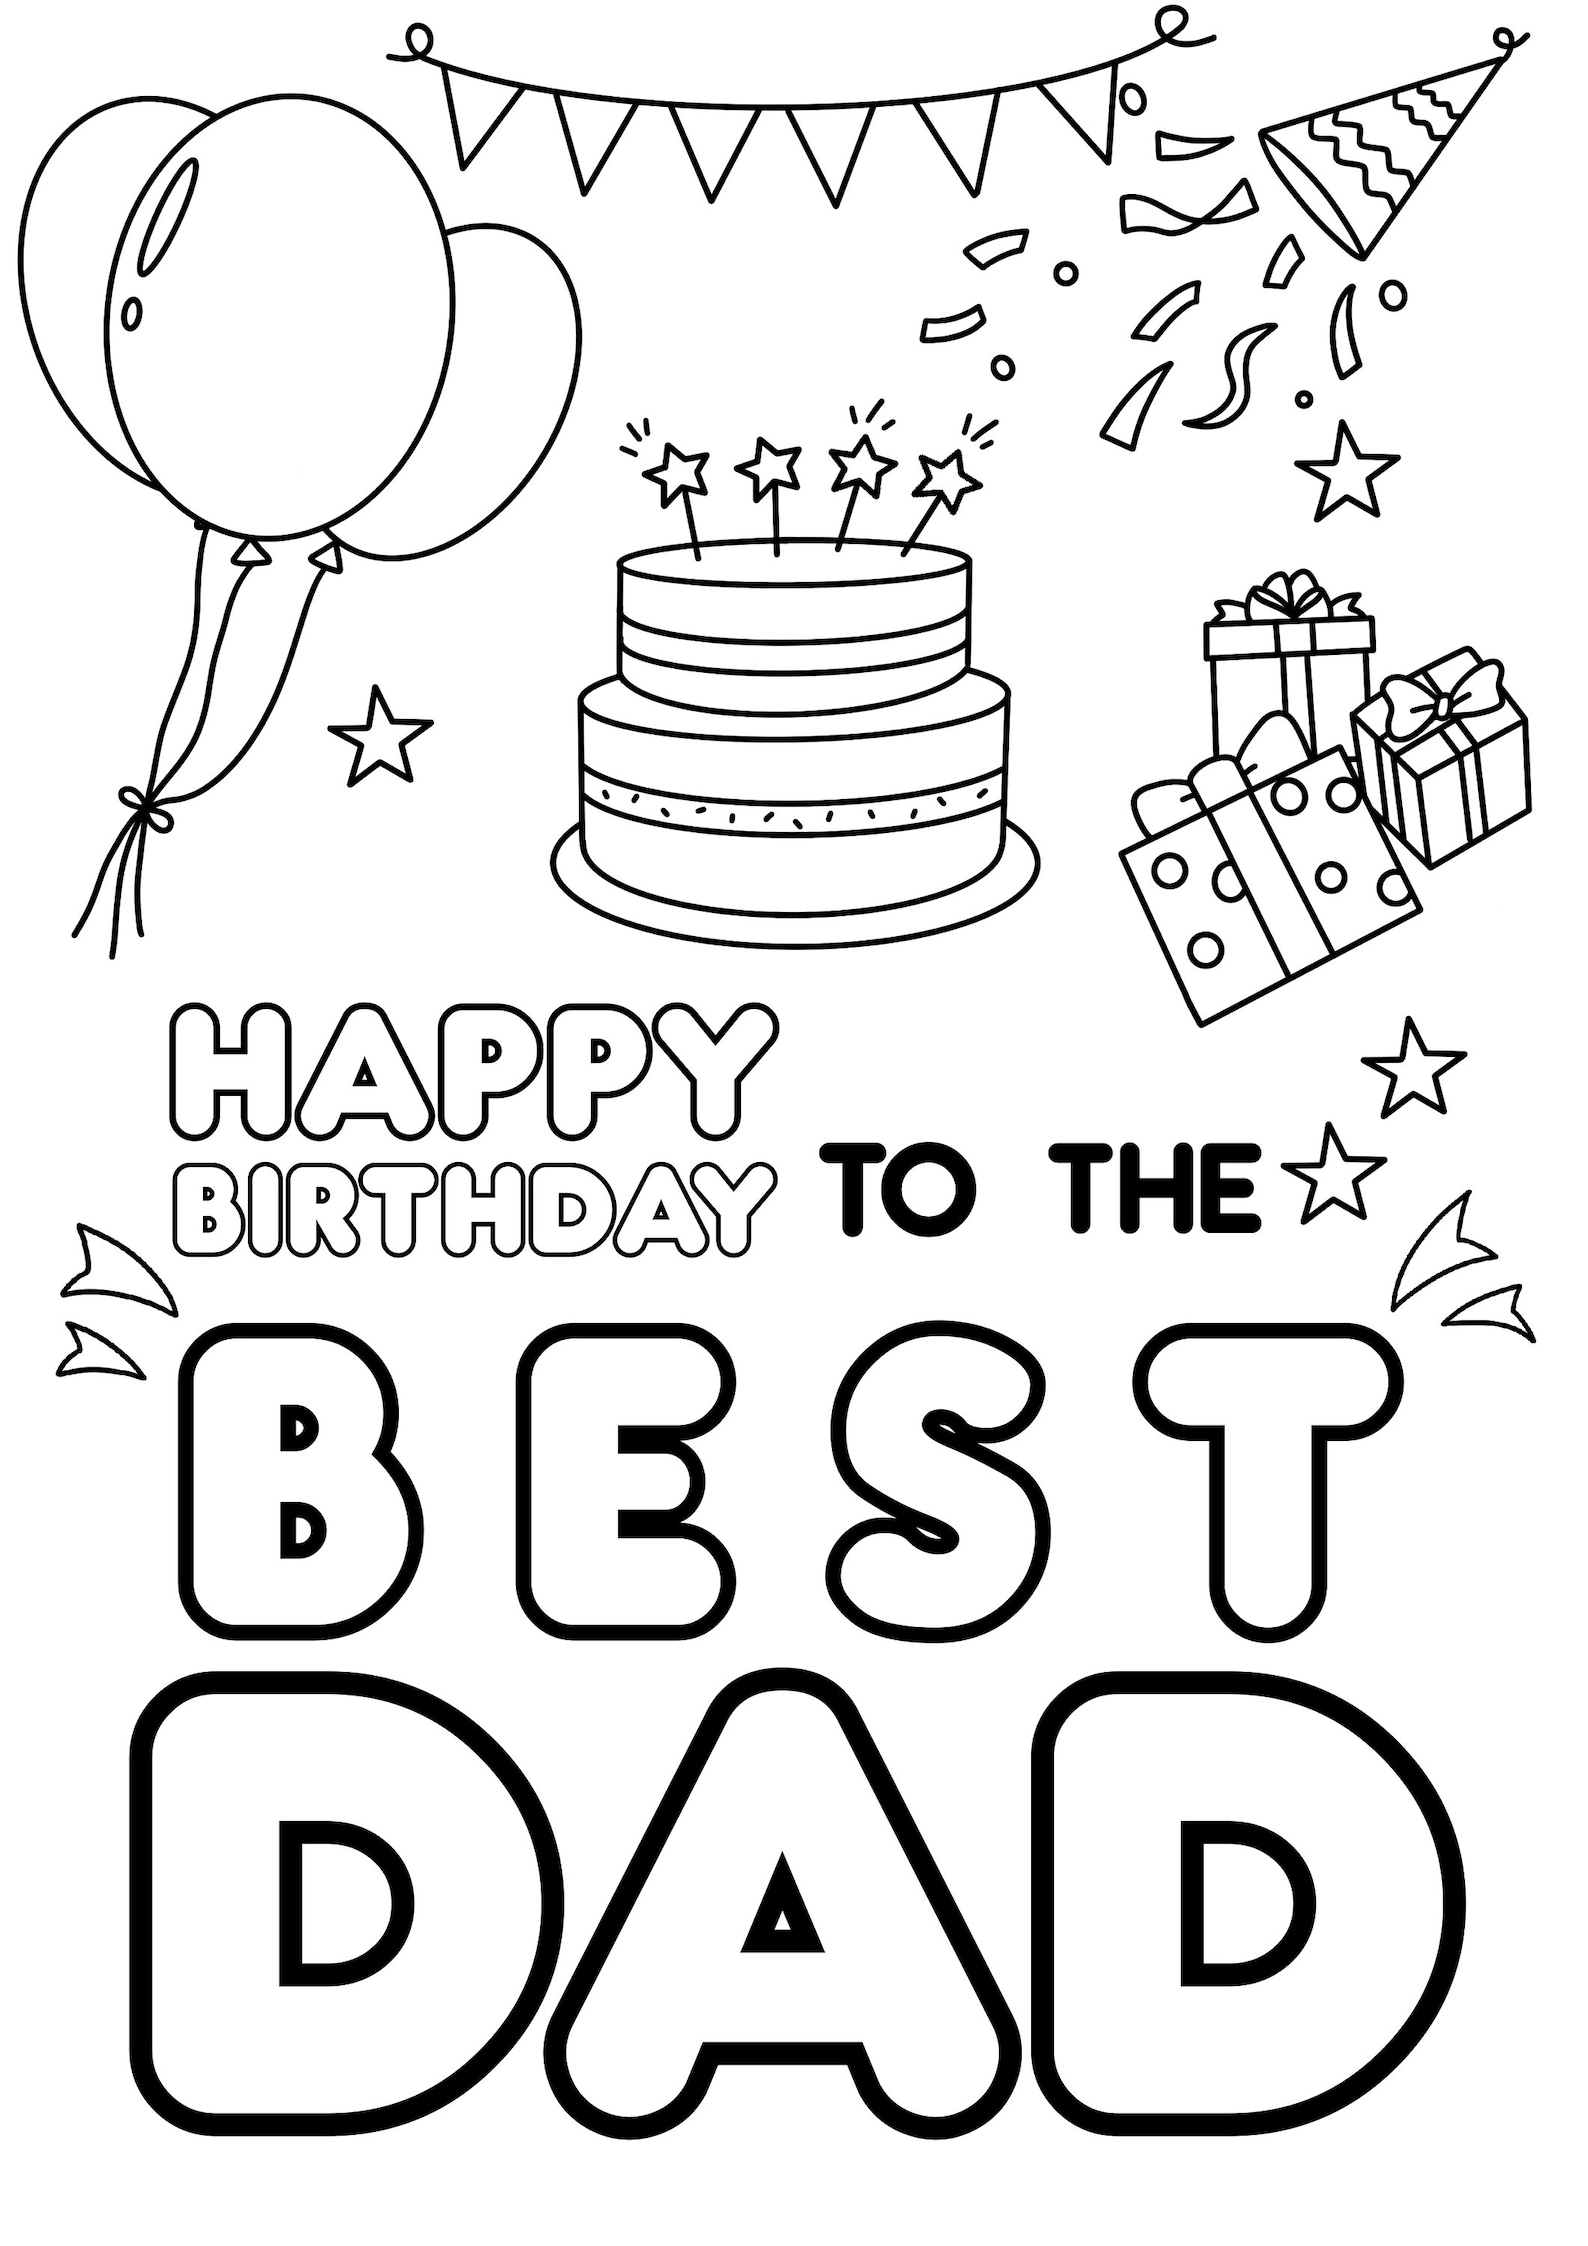 Happy Birthday to the Best Dad Coloring Card Envelope Etsy